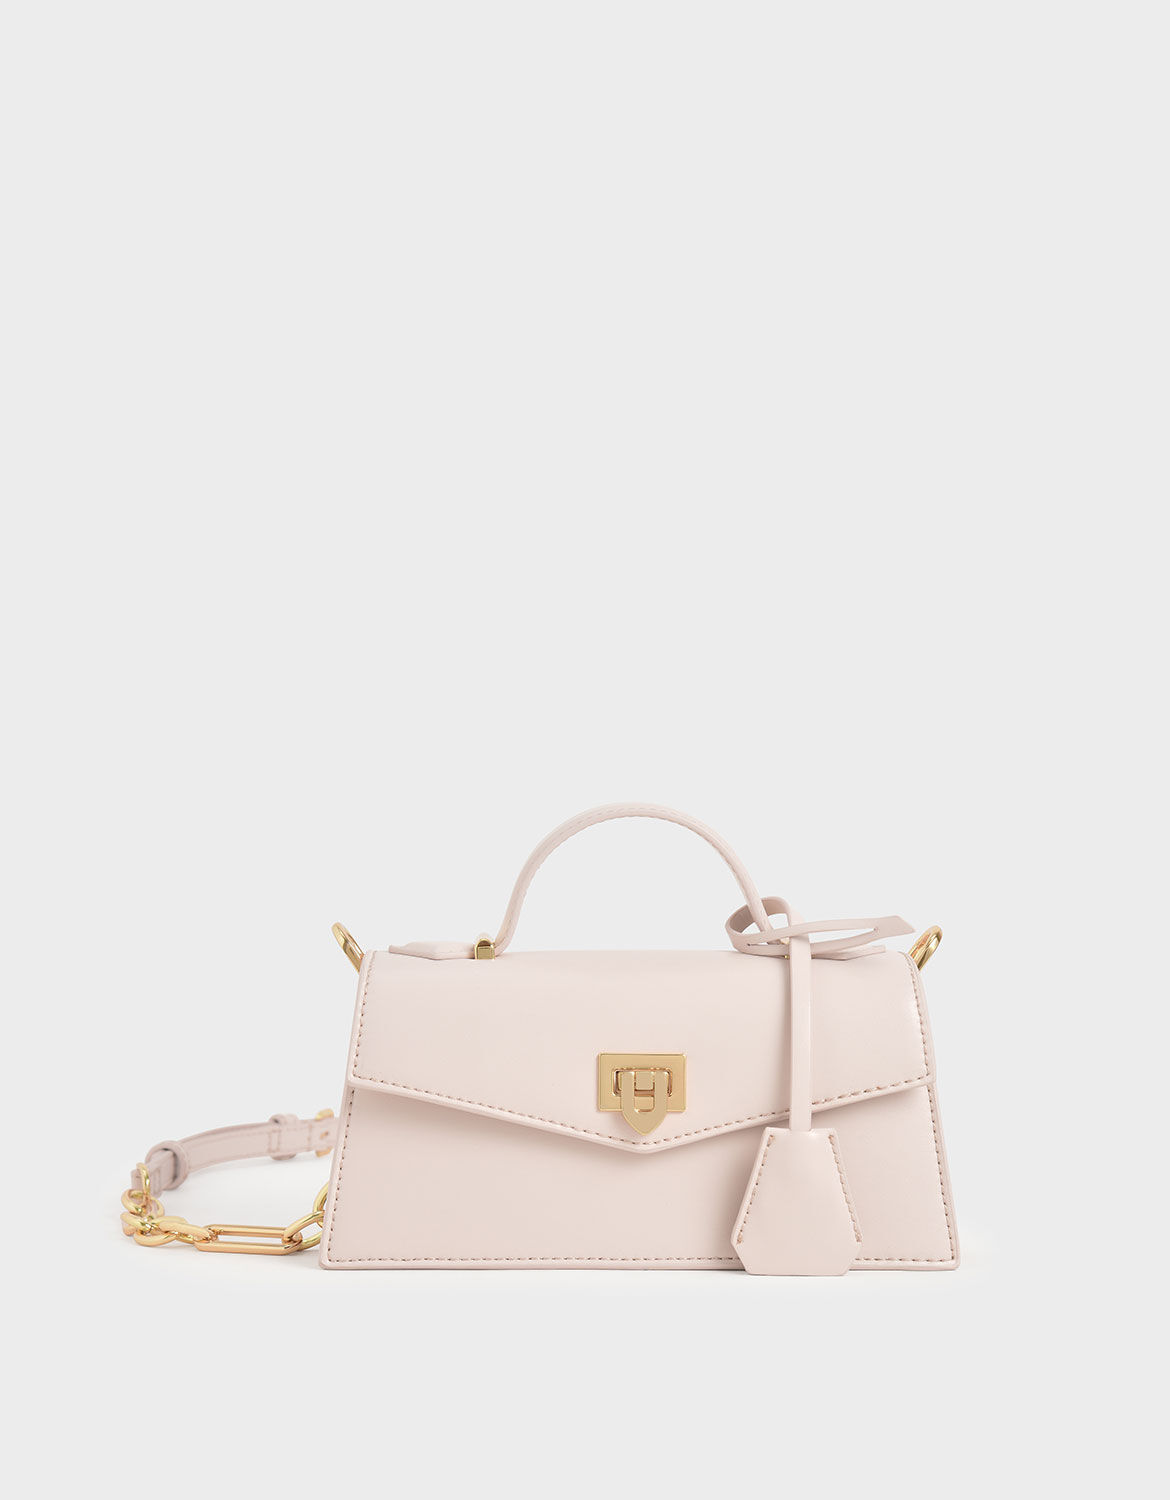 Shop Women’s Bags Online | CHARLES & KEITH AU